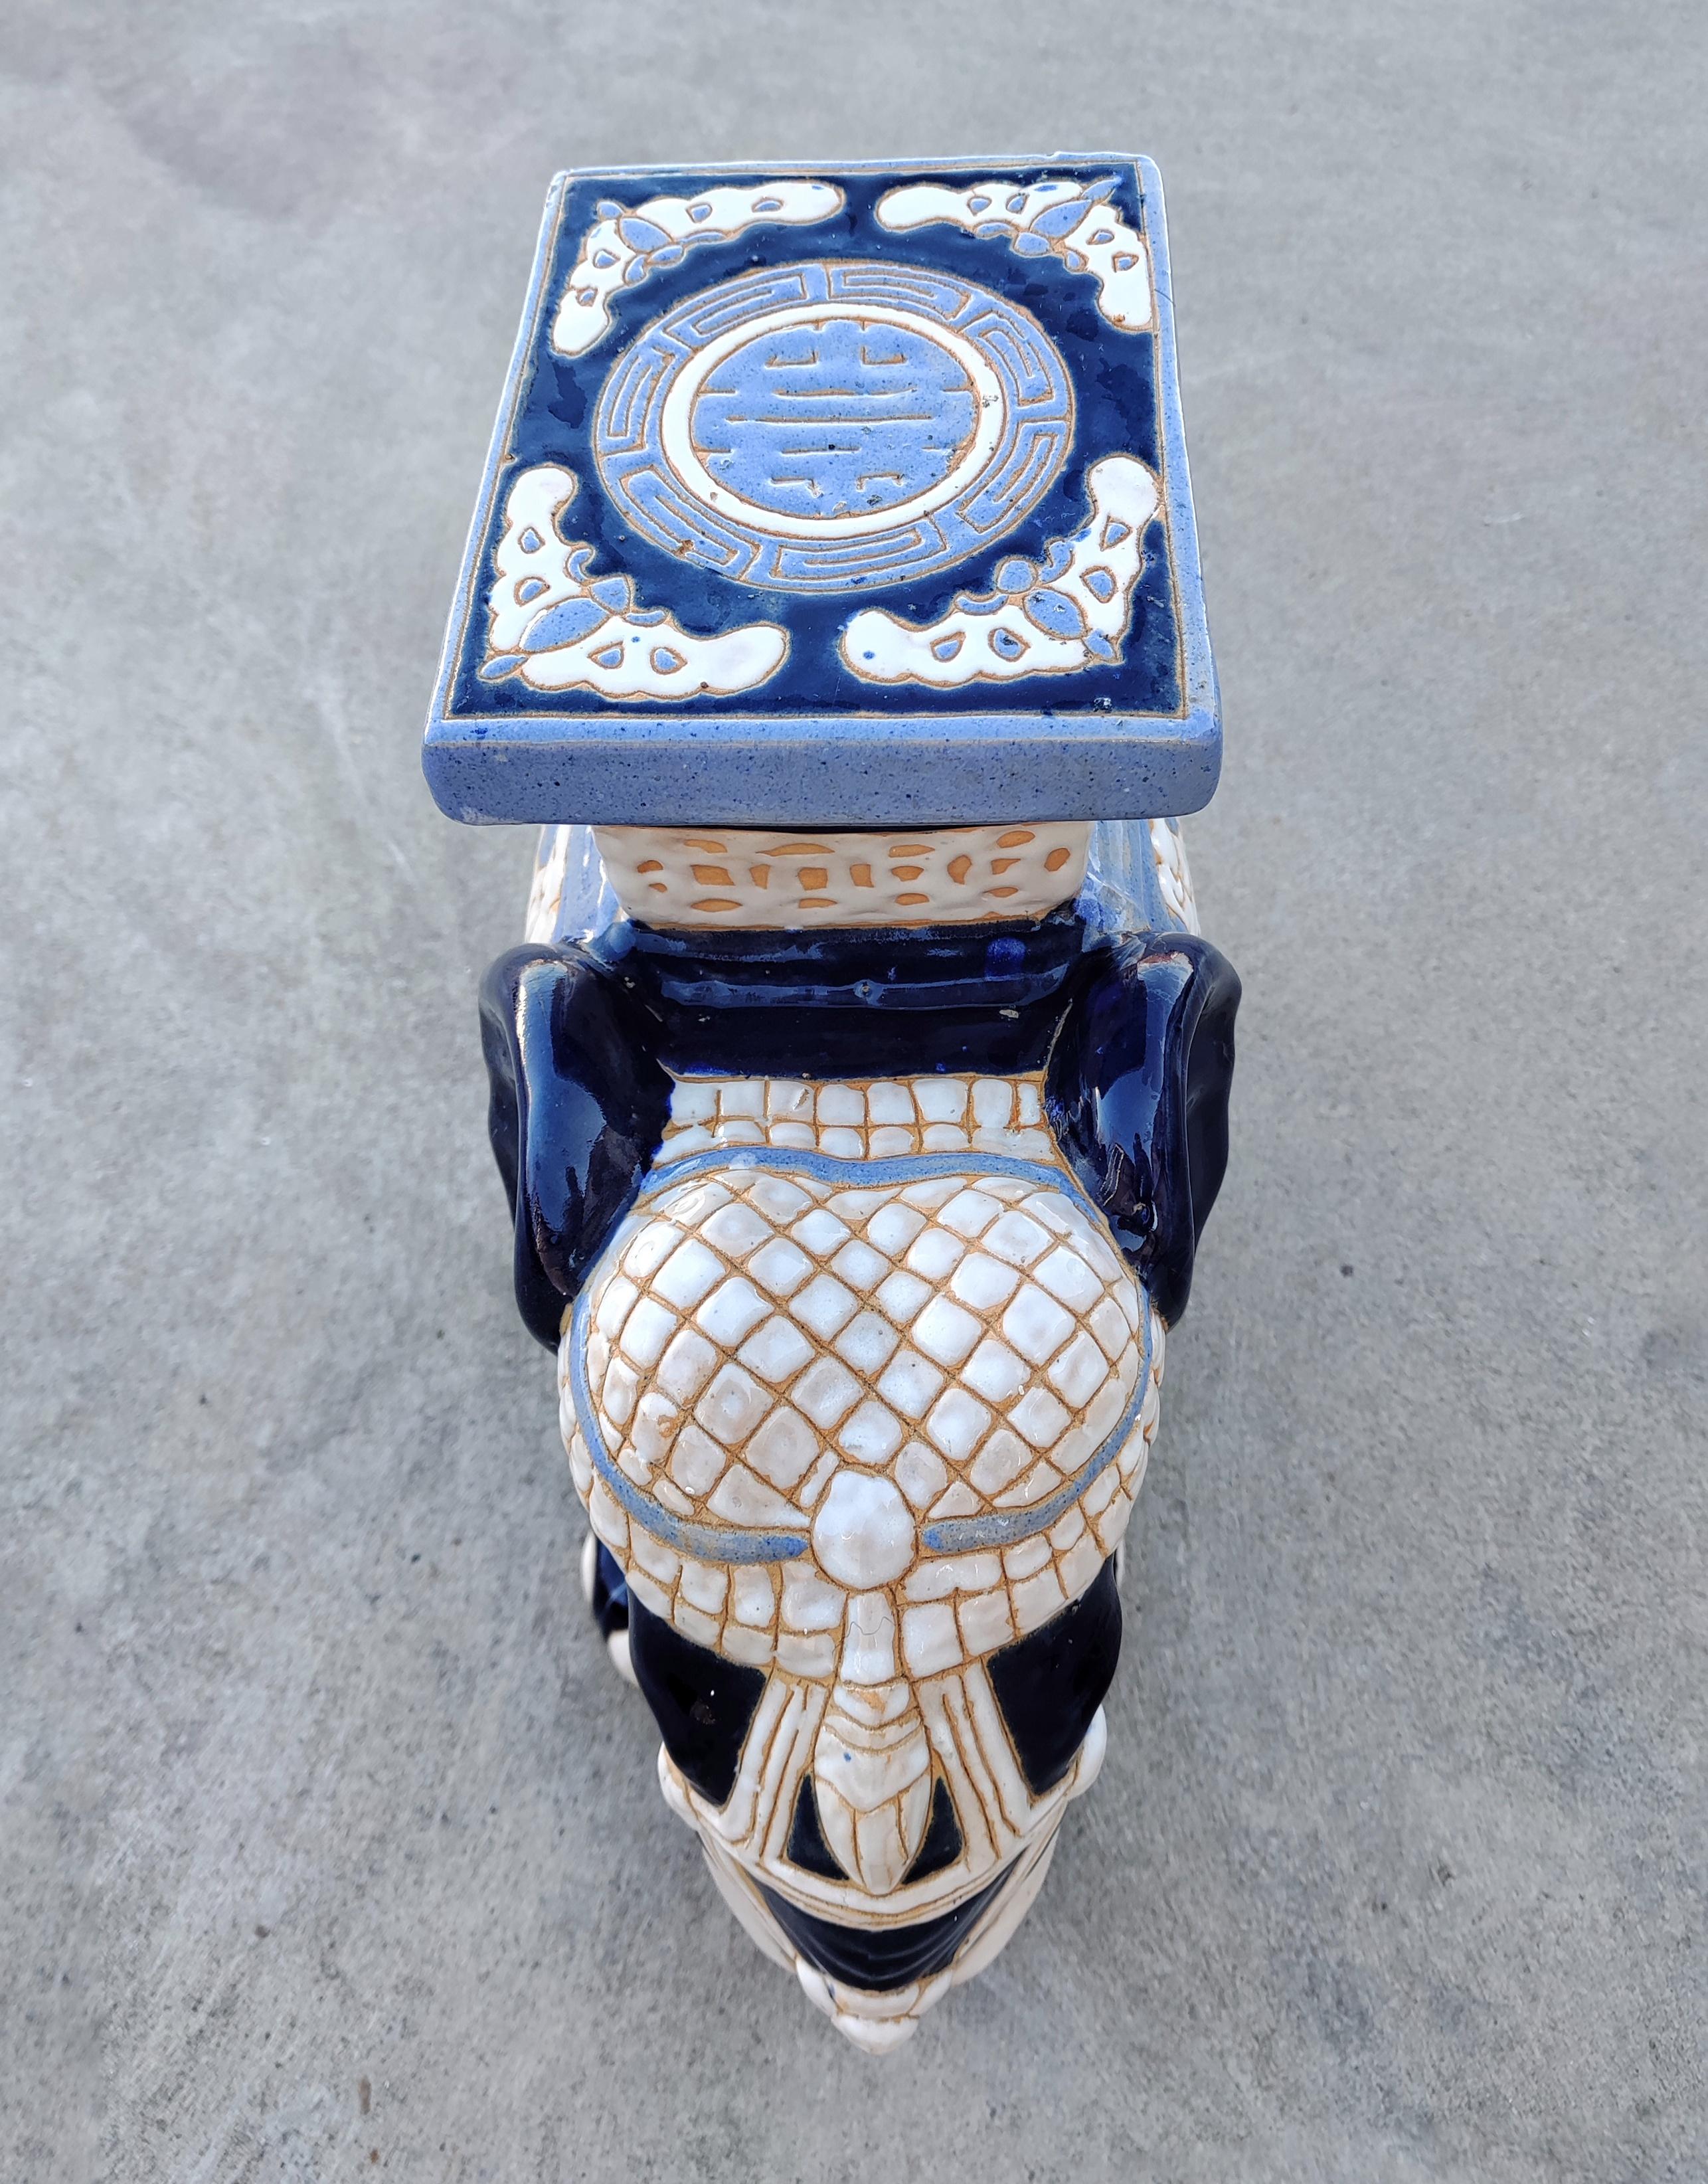 In this listing you will find a large ceramic and very decorative garden stool or plant stand in the shape of an elephant made in blue and white ceramics. A saddle seat and blanket on the elephant are glazed with celadon hues, laced with cobalt blue